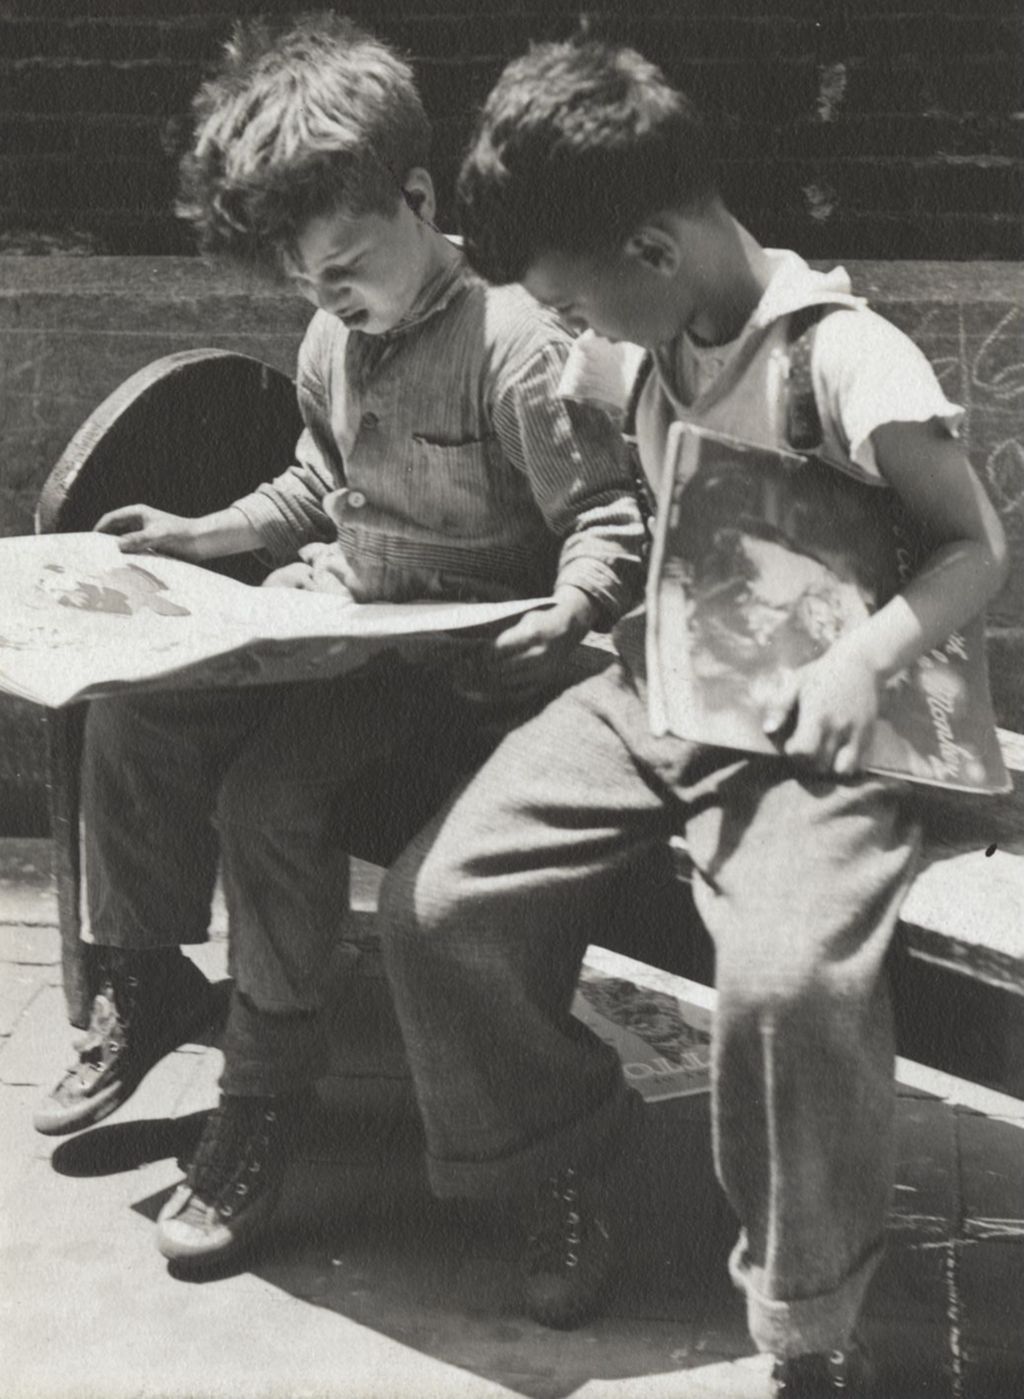 Two boys sitting outside on bench reading